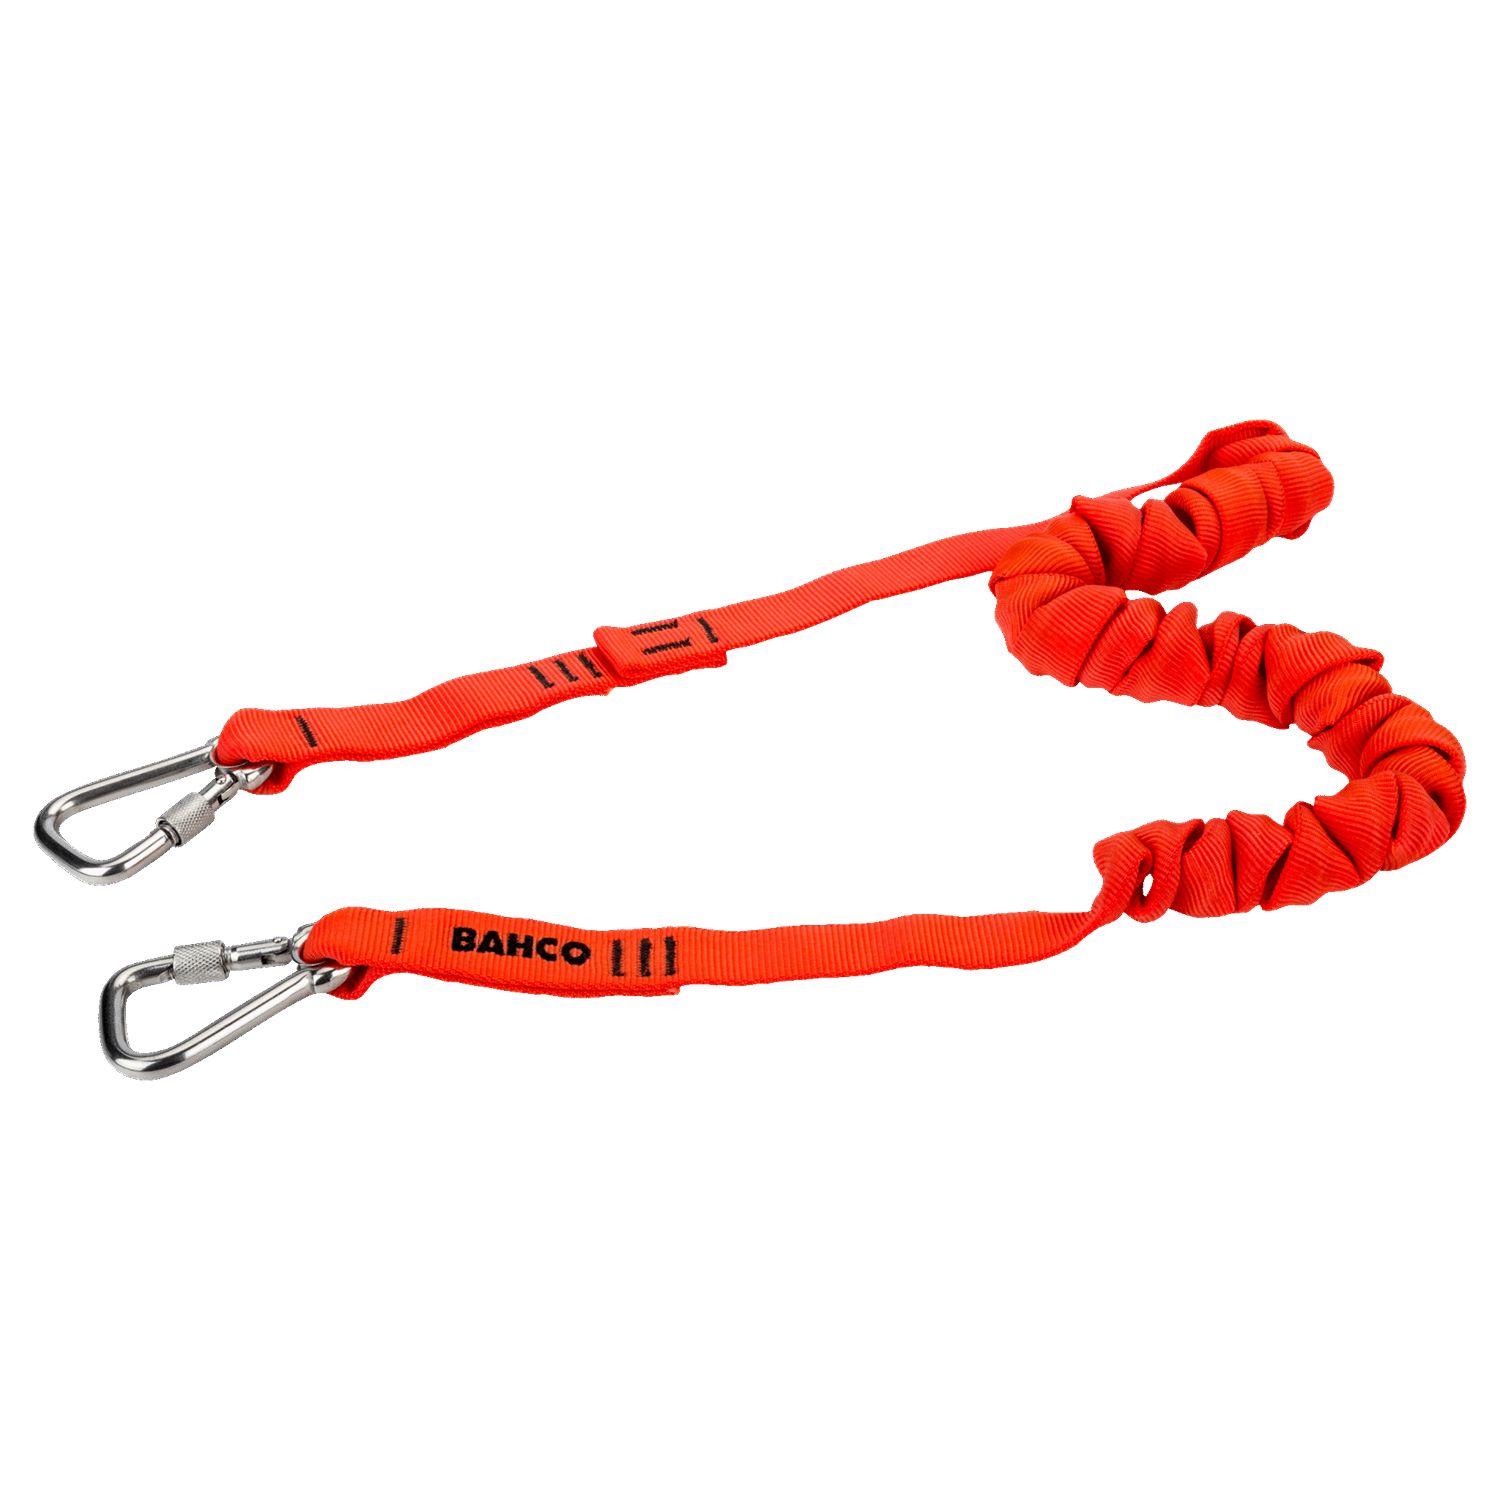 BAHCO 3875-LY8 Strap Lanyard with Fixed Carabiner 6 kg - Premium Lanyard from BAHCO - Shop now at Yew Aik.